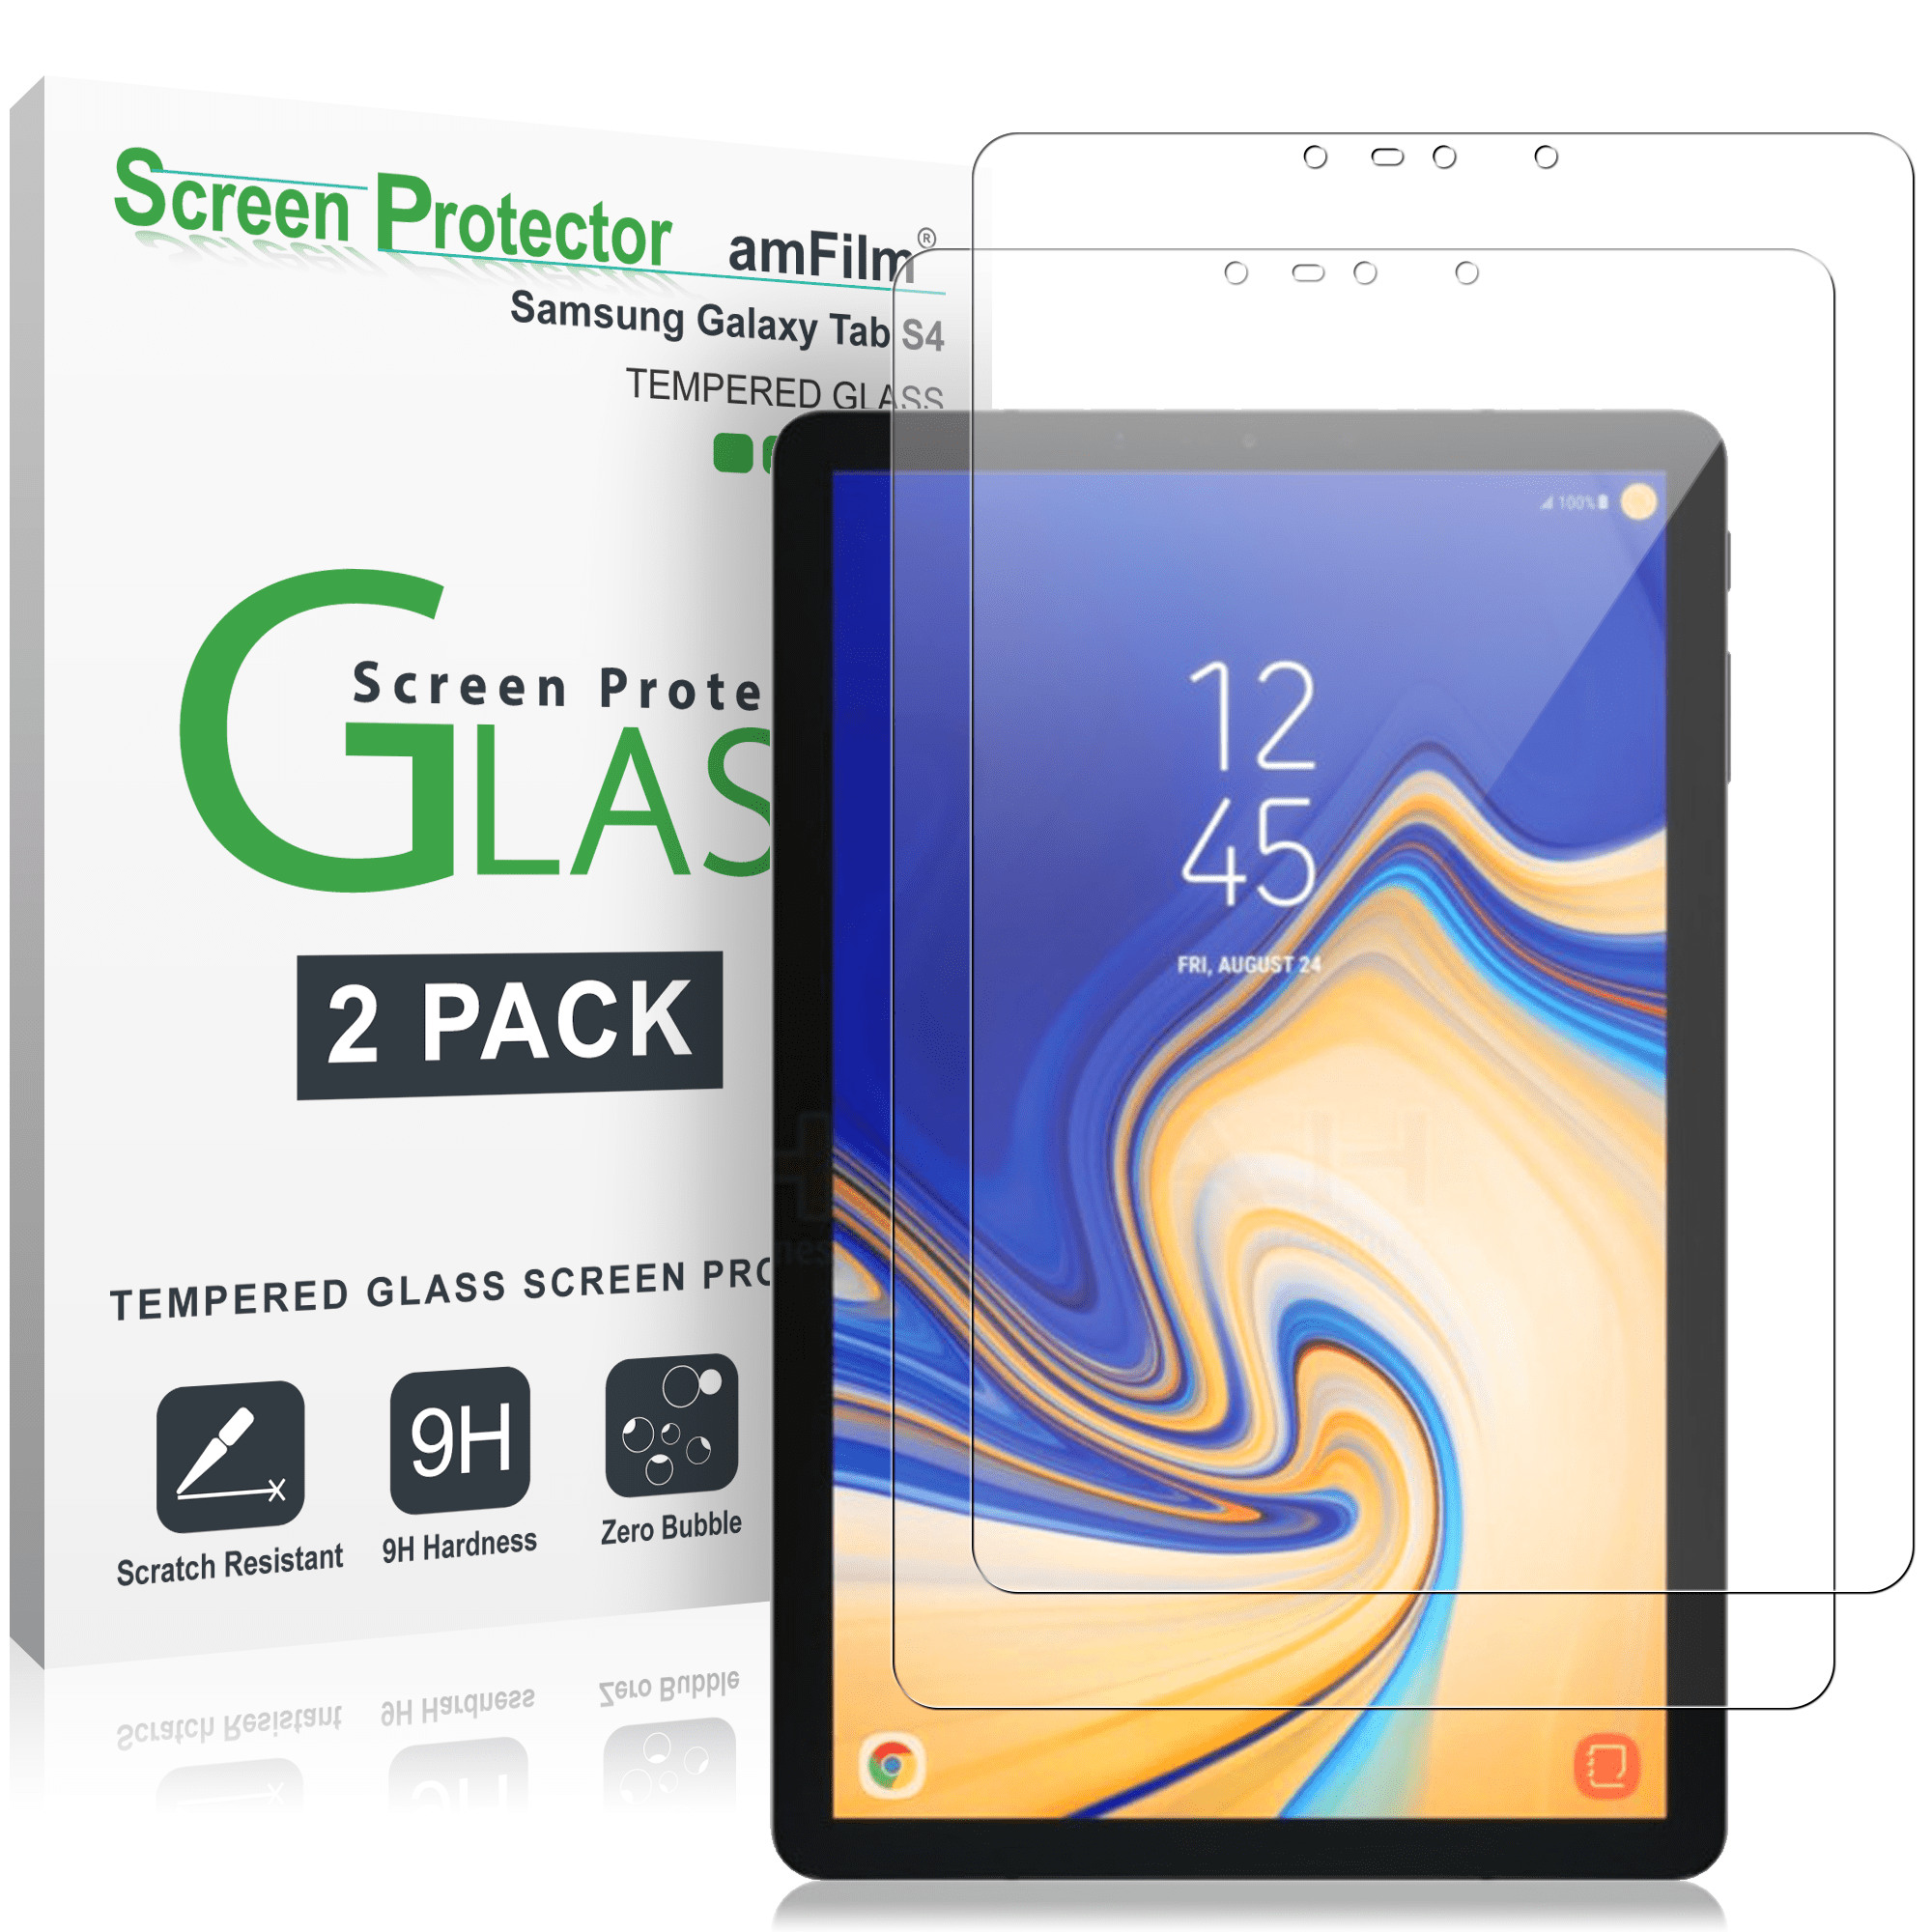 10.5 inch 3x Dmax Armor Clear Screen Protector for Samsung Galaxy Tab S4 